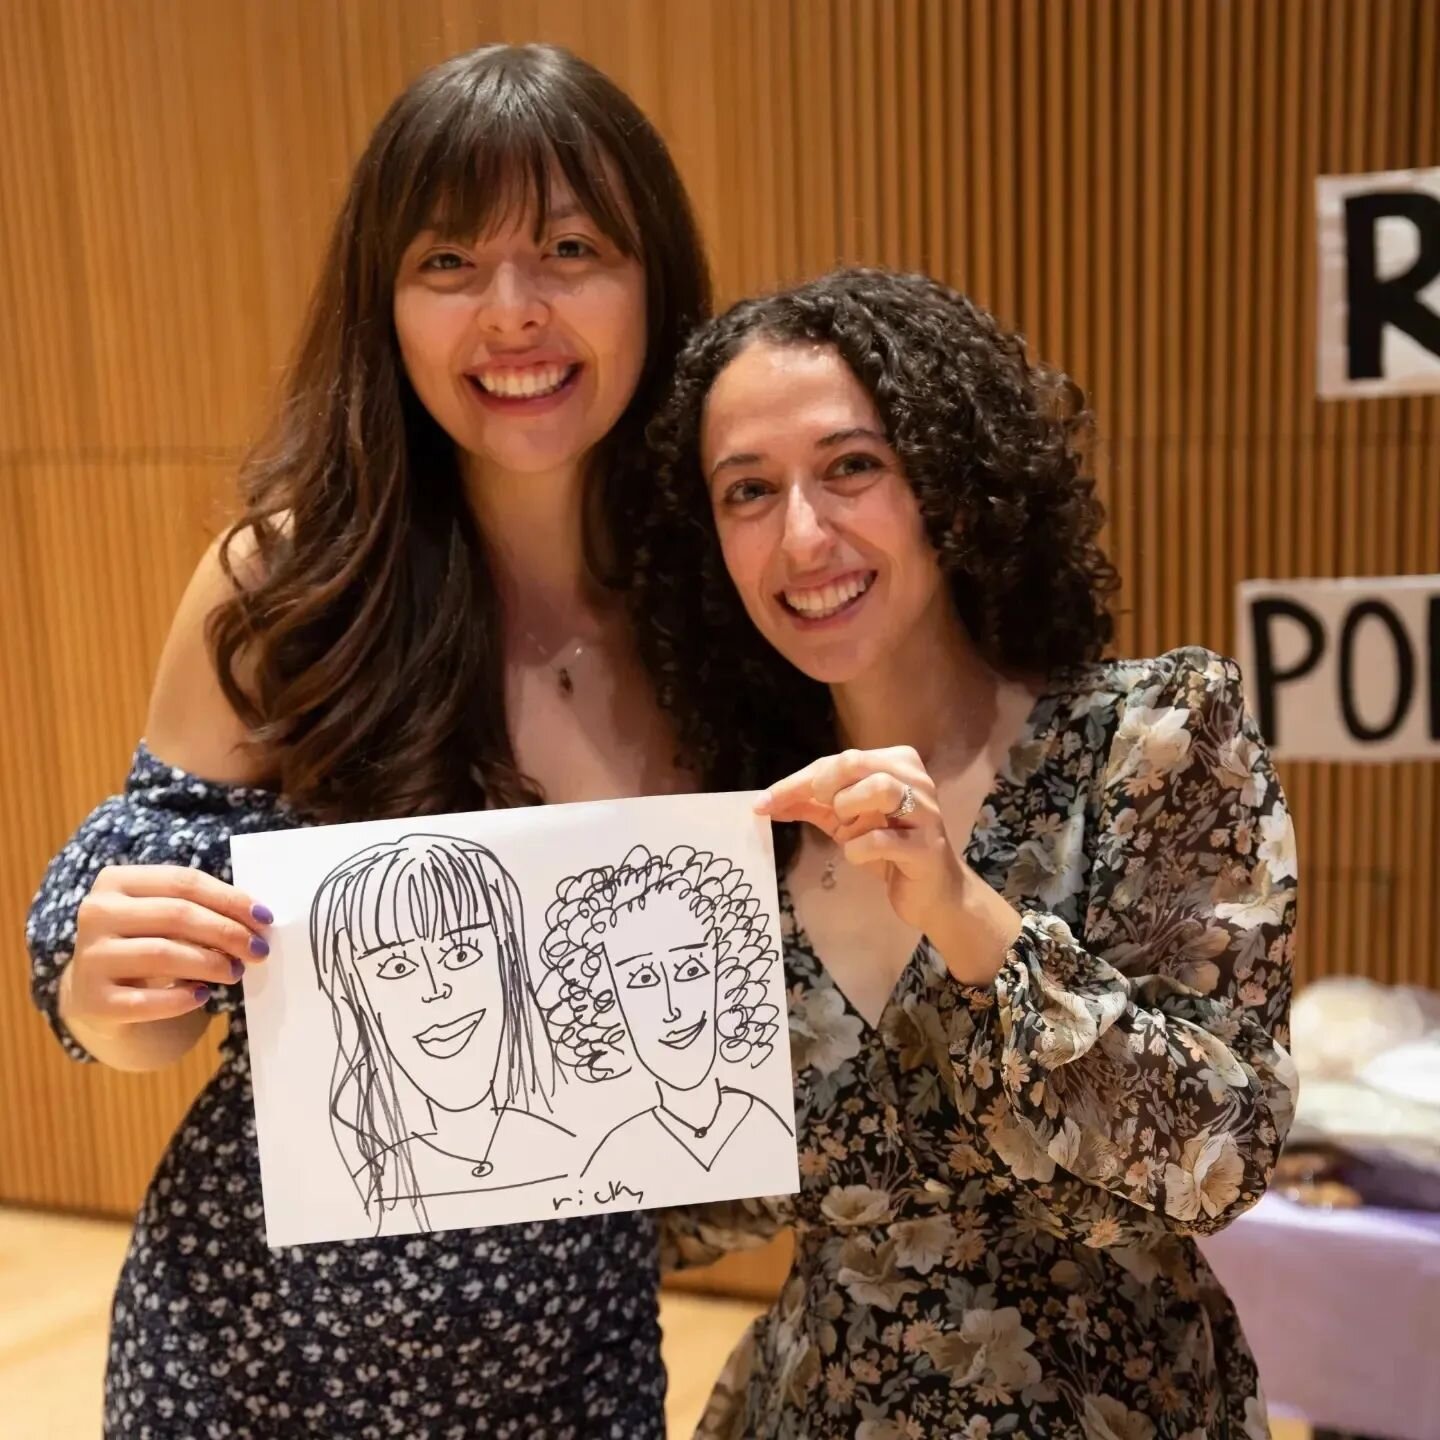 YAY! So excited to share some of the amazing shots that @kaylamillerphotography took at the EXPO Awards Ceremony last Monday

1 - A really bad portrait drawn of us during the after party by @really_bad_portraits
2 - Some of our amazing artists, perfo